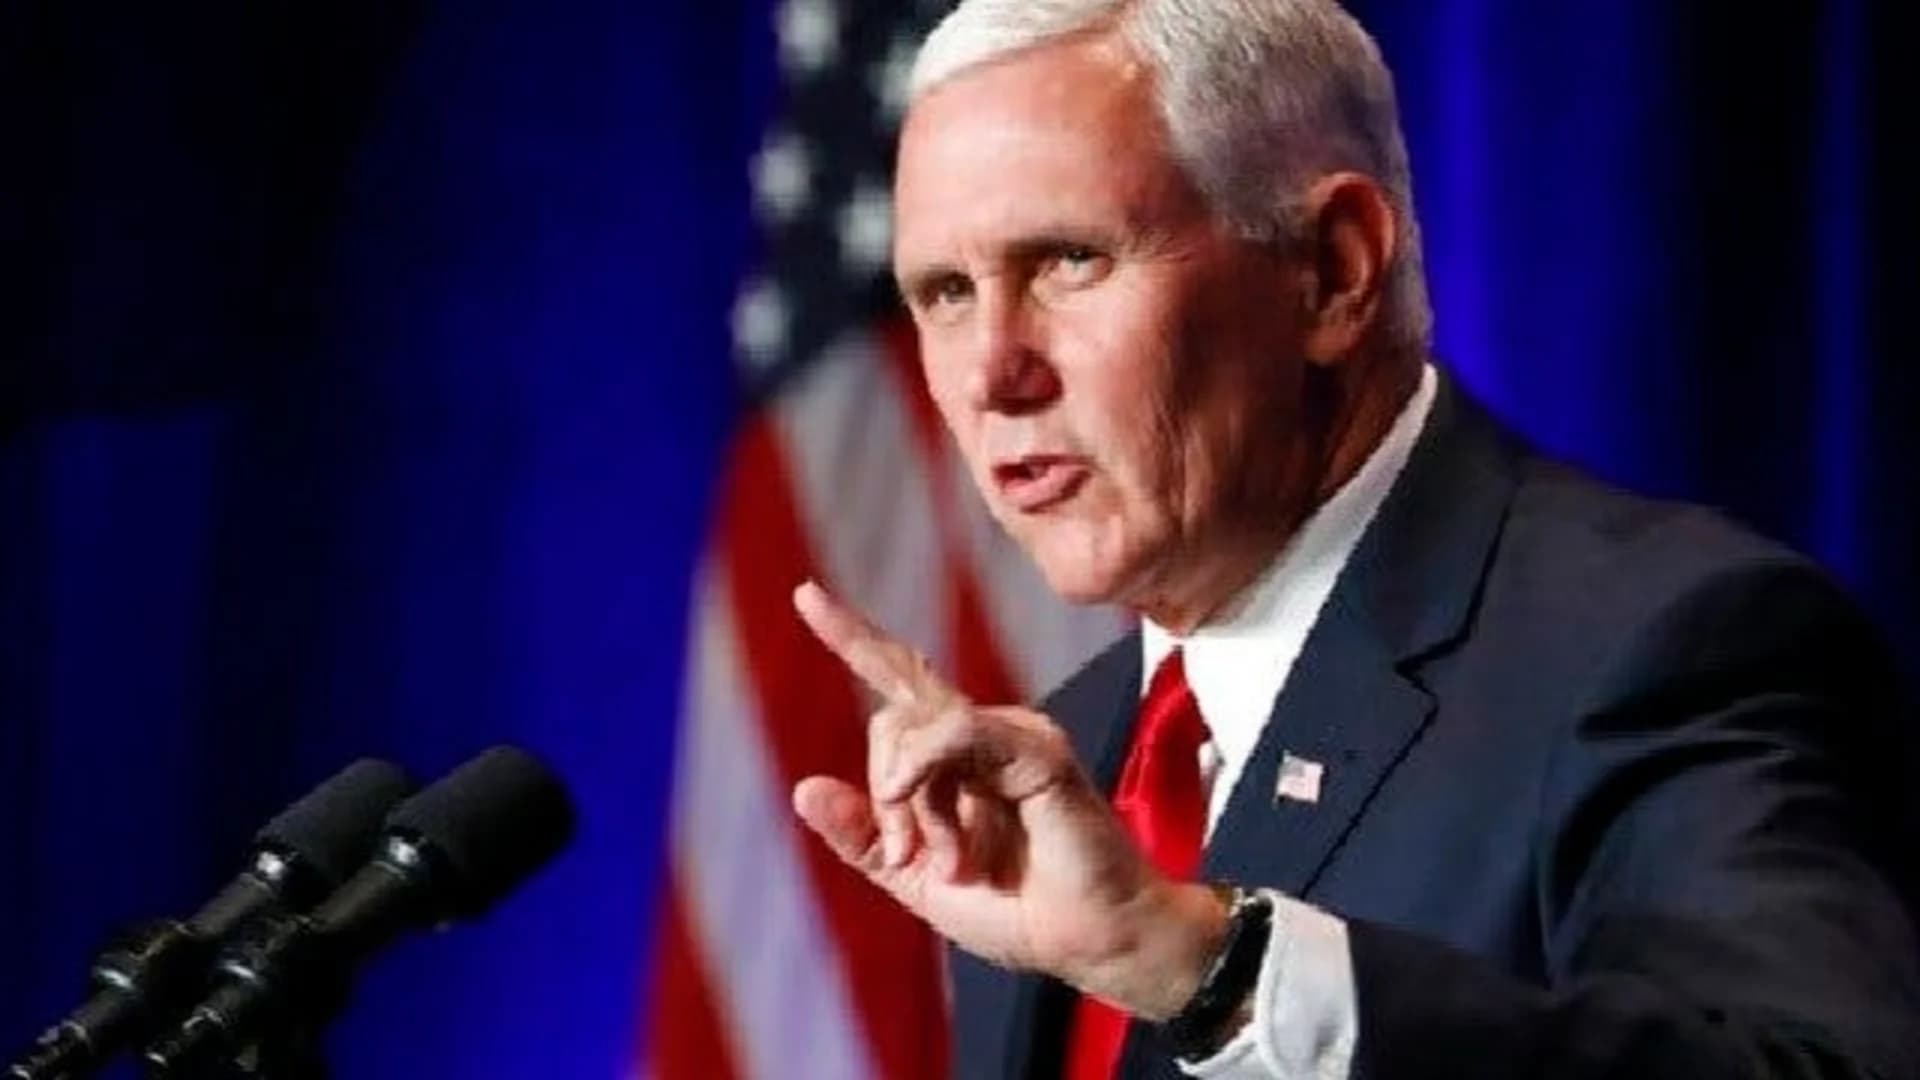 Pence: Story on possible 2020 presidential run 'disgraceful'